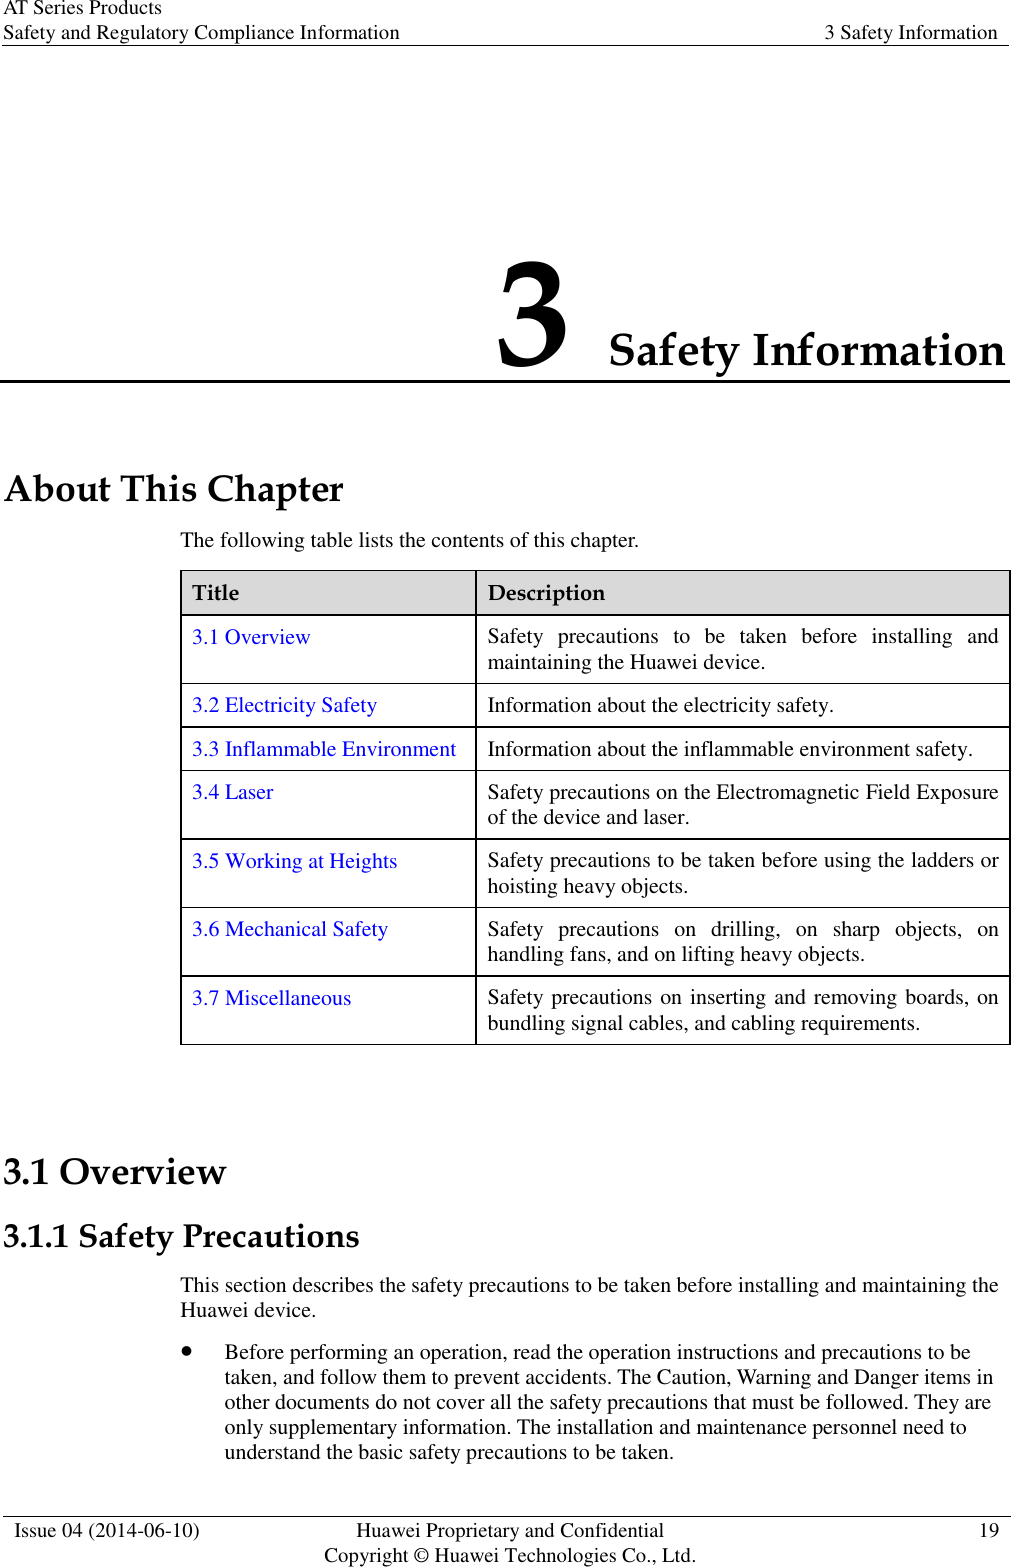 AT Series Products Safety and Regulatory Compliance Information 3 Safety Information  Issue 04 (2014-06-10) Huawei Proprietary and Confidential           Copyright © Huawei Technologies Co., Ltd. 19  3 Safety Information About This Chapter The following table lists the contents of this chapter. Title Description 3.1 Overview Safety  precautions  to  be  taken  before  installing  and maintaining the Huawei device. 3.2 Electricity Safety Information about the electricity safety. 3.3 Inflammable Environment Information about the inflammable environment safety. 3.4 Laser Safety precautions on the Electromagnetic Field Exposure of the device and laser. 3.5 Working at Heights Safety precautions to be taken before using the ladders or hoisting heavy objects. 3.6 Mechanical Safety Safety  precautions  on  drilling,  on  sharp  objects,  on handling fans, and on lifting heavy objects. 3.7 Miscellaneous Safety precautions on inserting and removing boards, on bundling signal cables, and cabling requirements.  3.1 Overview 3.1.1 Safety Precautions This section describes the safety precautions to be taken before installing and maintaining the Huawei device.  Before performing an operation, read the operation instructions and precautions to be taken, and follow them to prevent accidents. The Caution, Warning and Danger items in other documents do not cover all the safety precautions that must be followed. They are only supplementary information. The installation and maintenance personnel need to understand the basic safety precautions to be taken. 